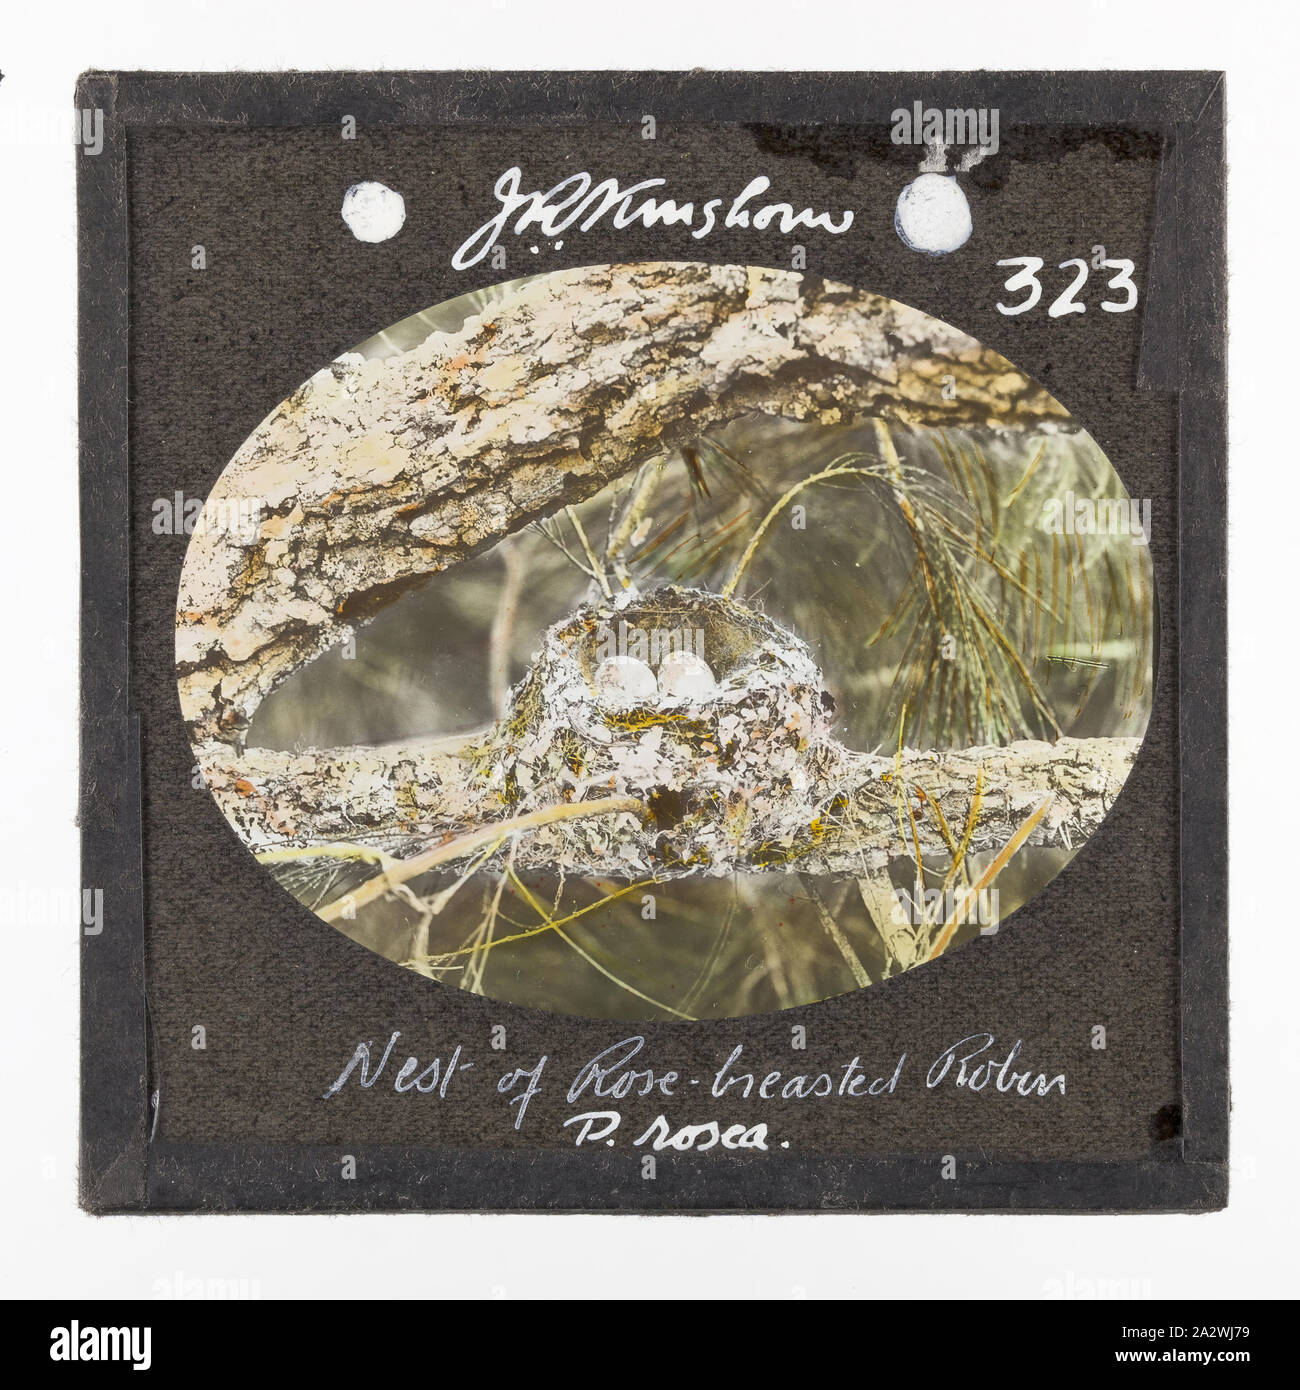 Lantern Slide - 'Nest of Rose-Breasted Robin', 1920-1940, Standard format coloured glass lantern slide depicting a rose-breasted robin nest with two eggs situated on the branch of a tree. Image by J. R. Kinghorn, (1891-1983), zoologist, museum curator and broadcaster. Kinghorn was employed at the Australian Museum in Sydney between 1907-1956 Stock Photo